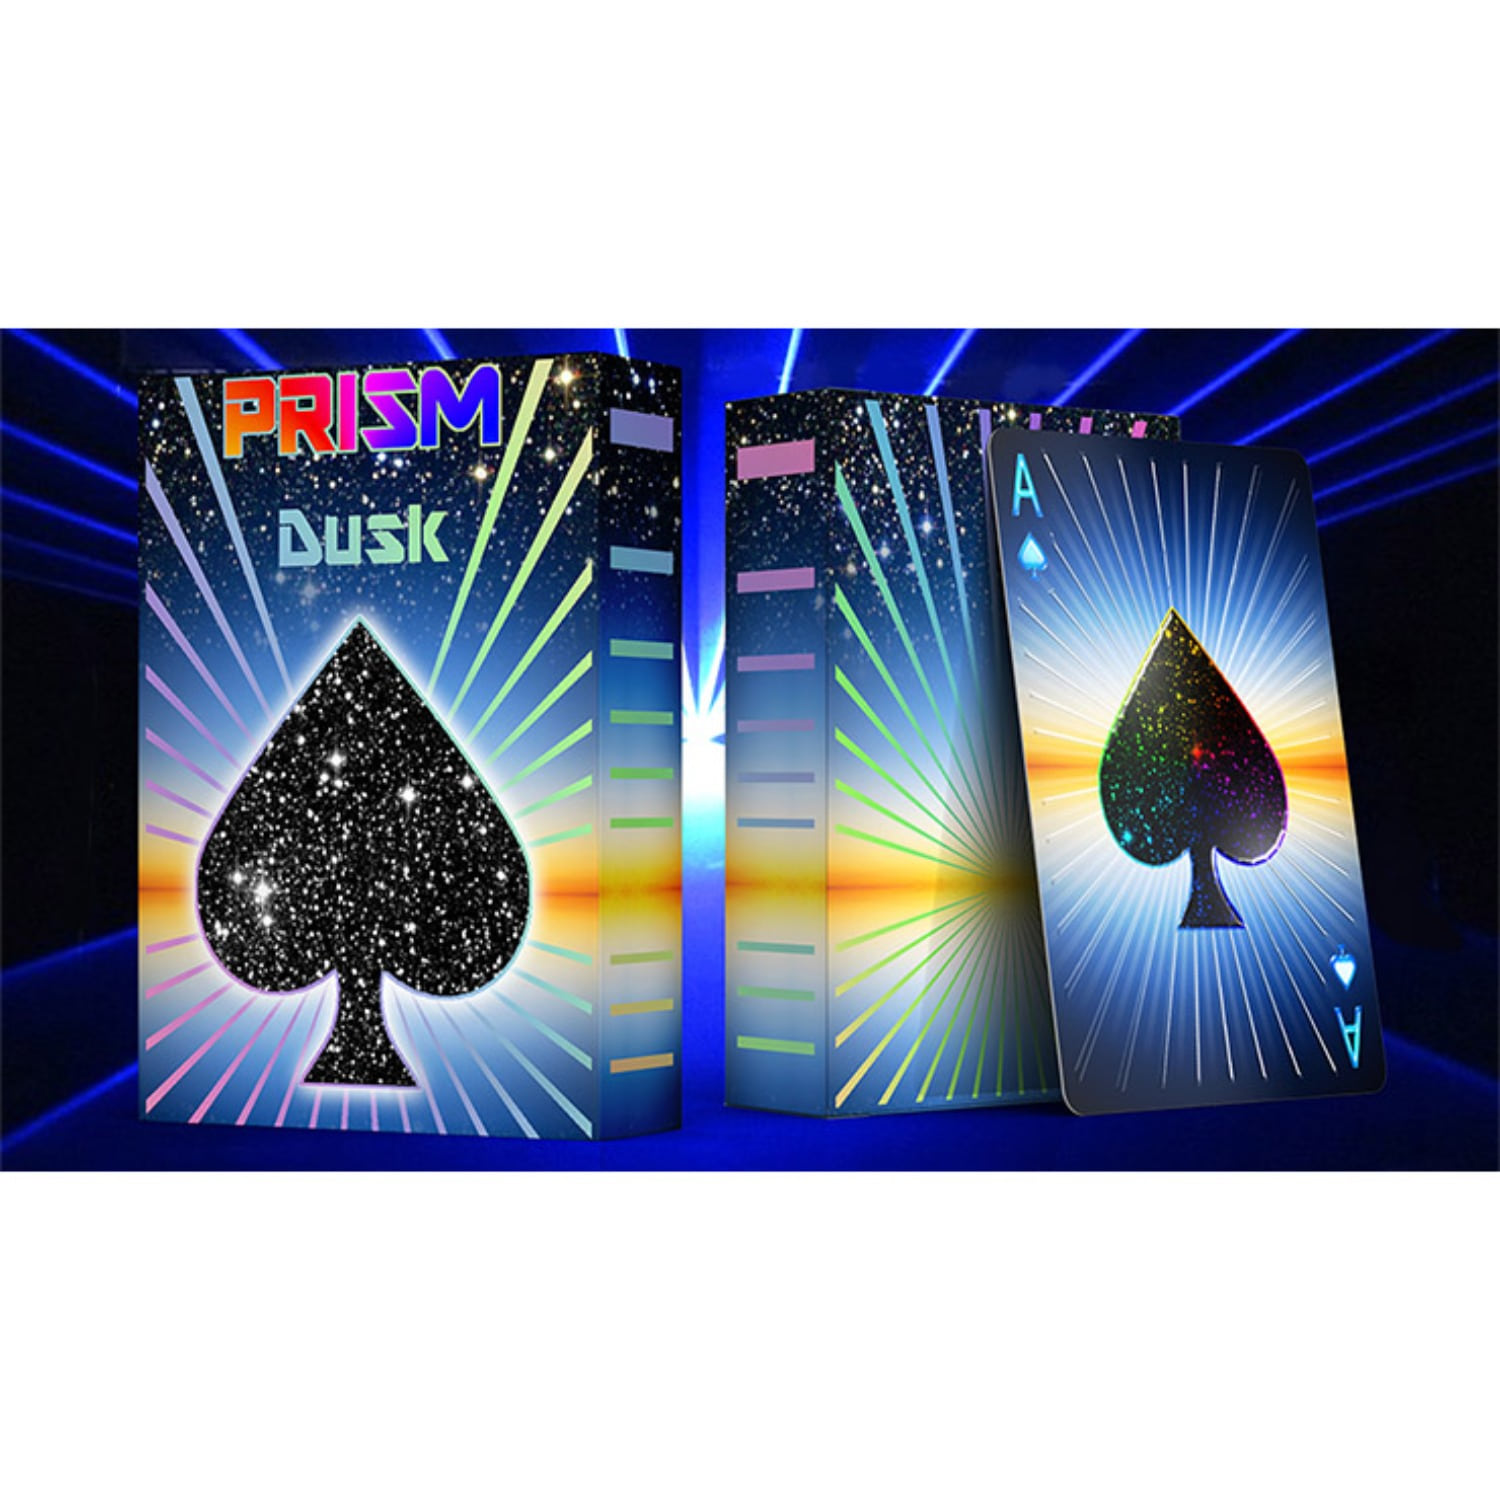 Prism Dusk Playing Cards by Elephant Playing Cards